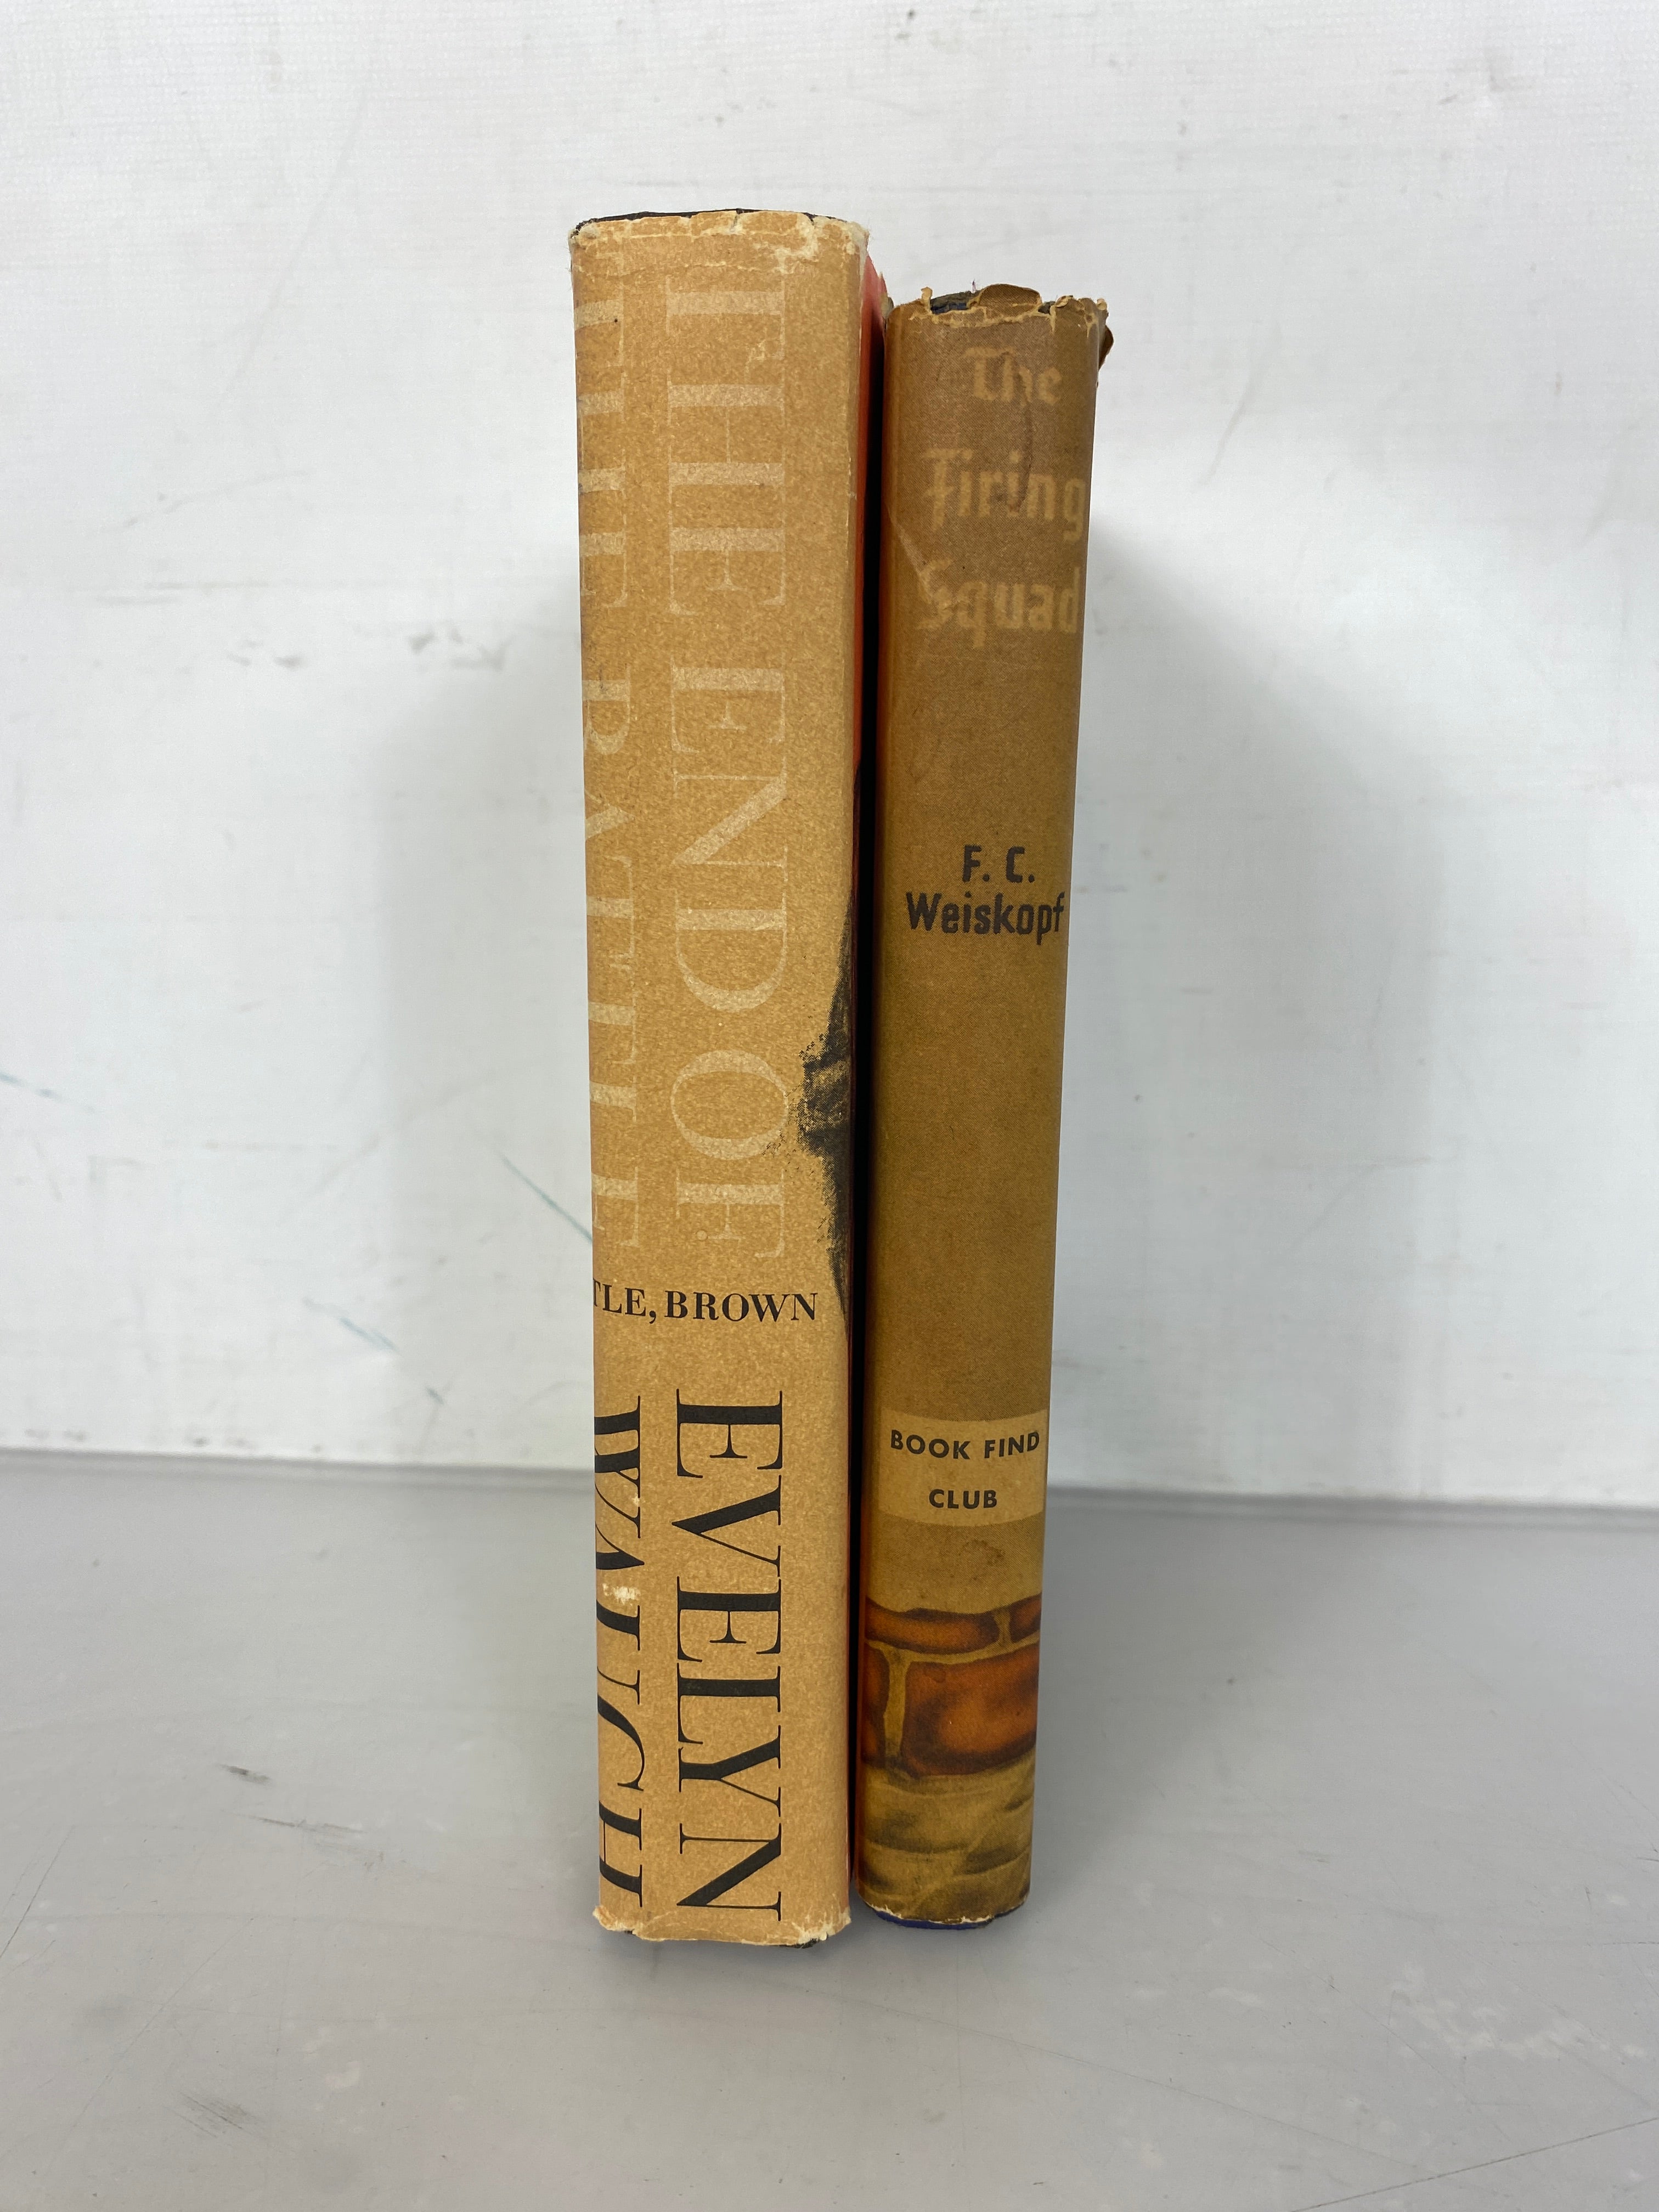 Lot of 2 WWII Novels: The End of the Battle and The Firing Squad HC DJ